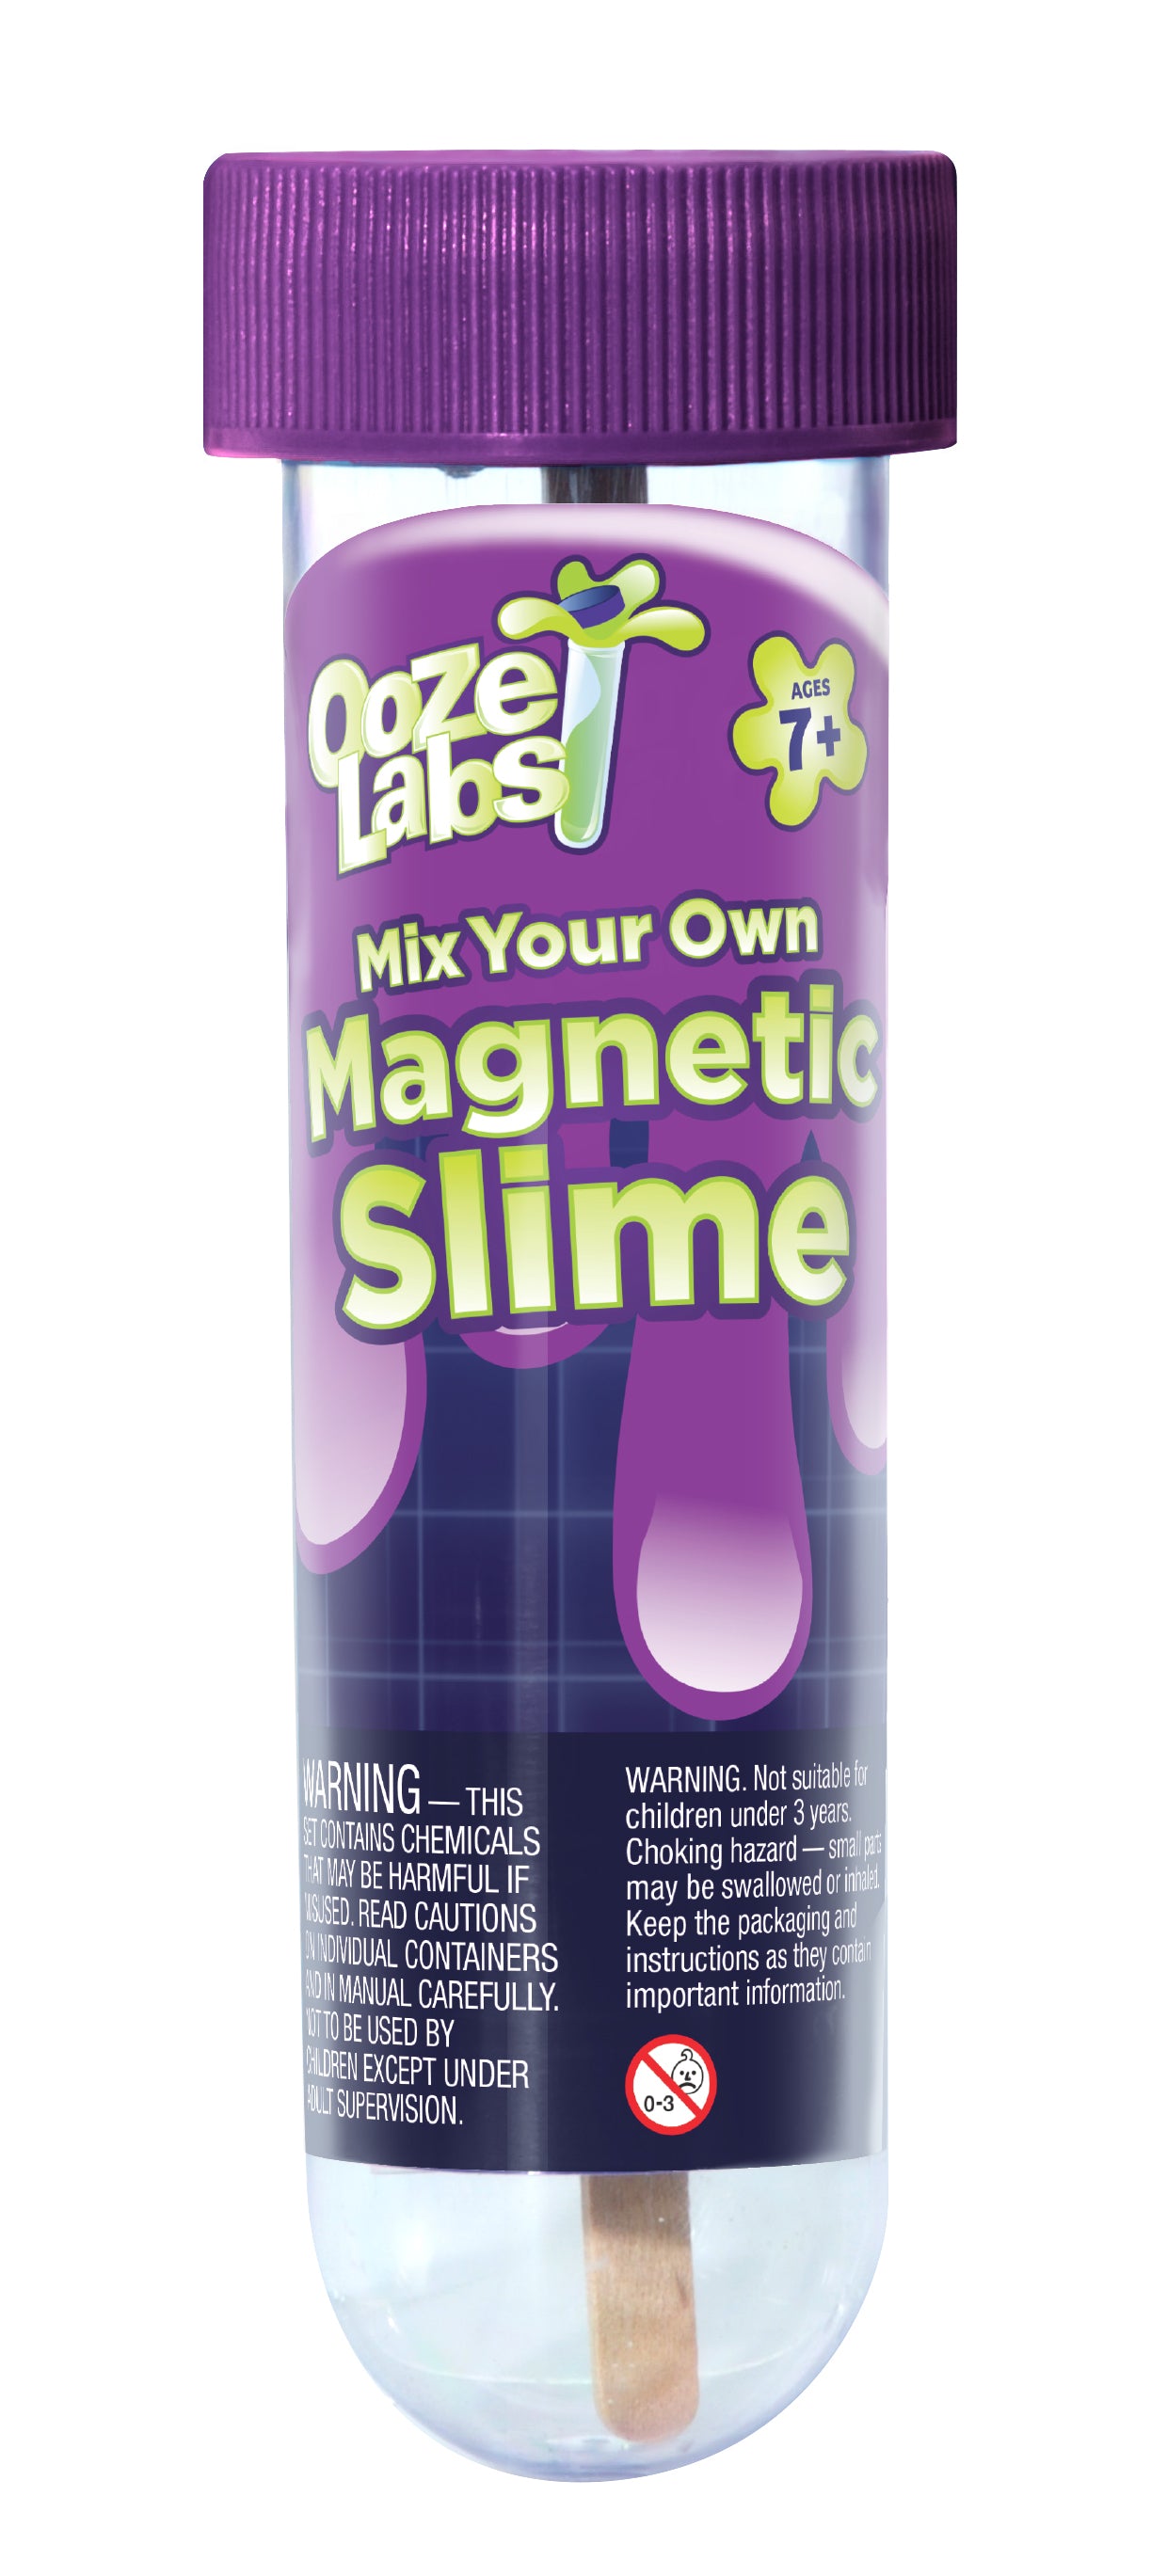 Ooze Labs: Magnetic Slime